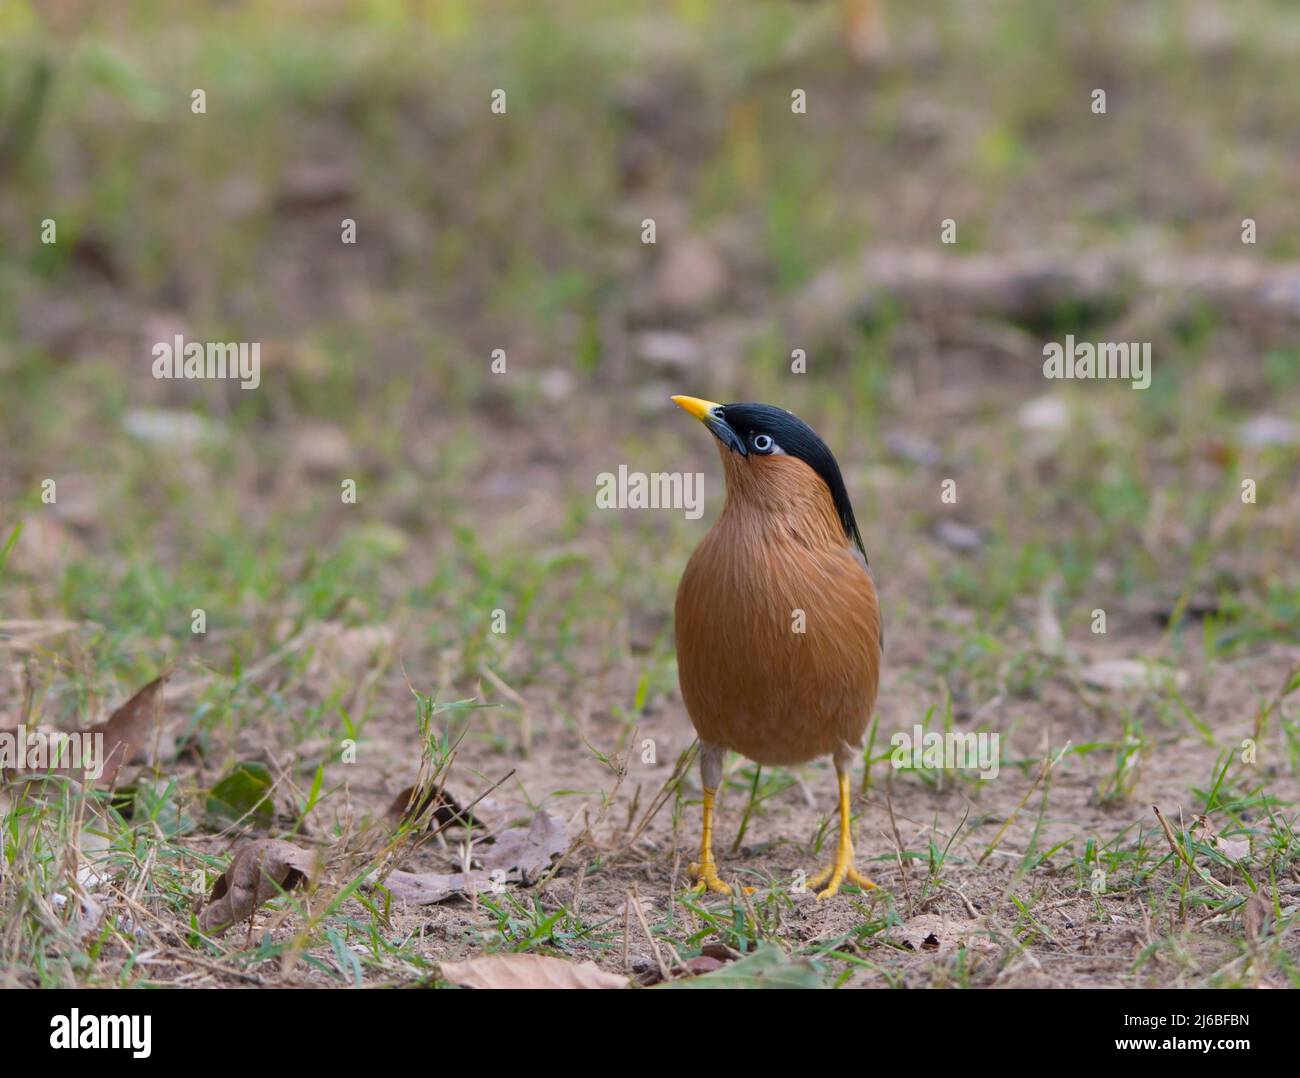 Brahminy Starling perched on ground Stock Photo